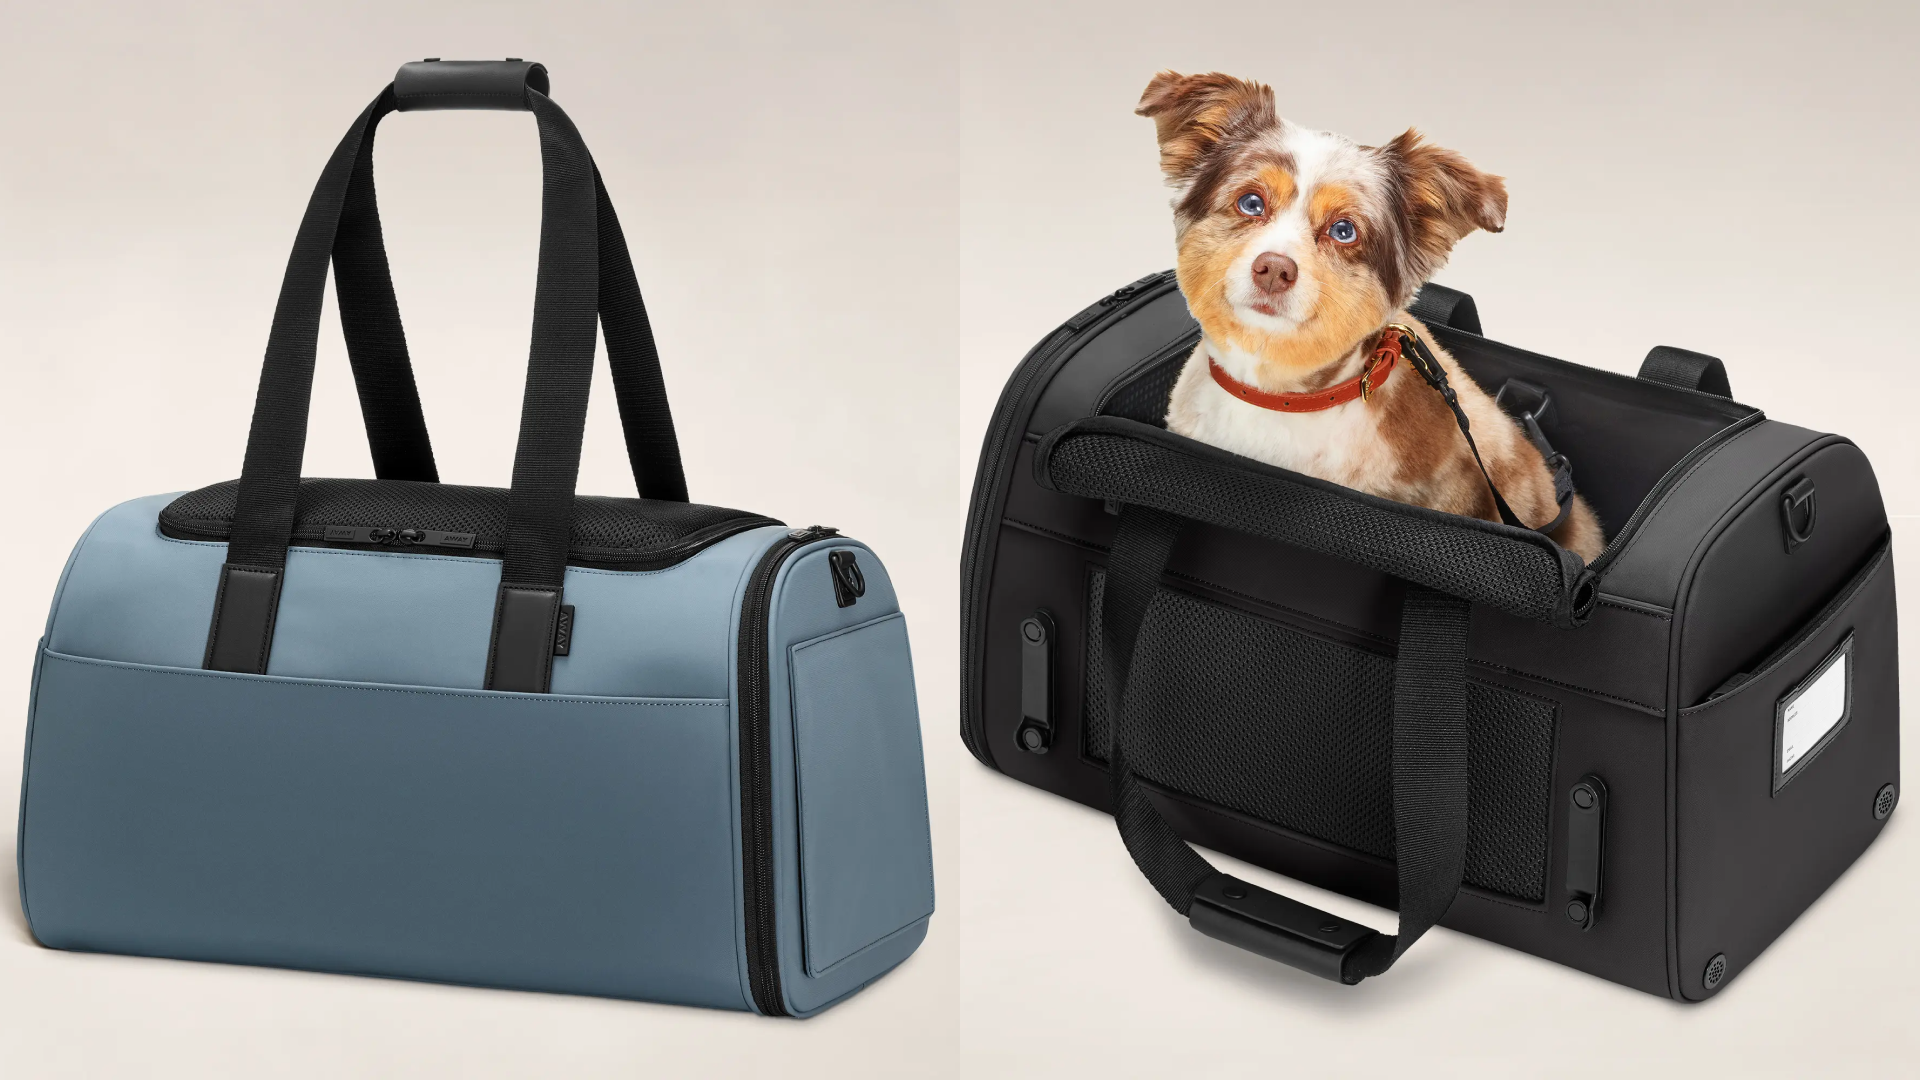 IDEE Cat Carrier, Dog Carrier, Pet Carrier Airline Approved, Dog